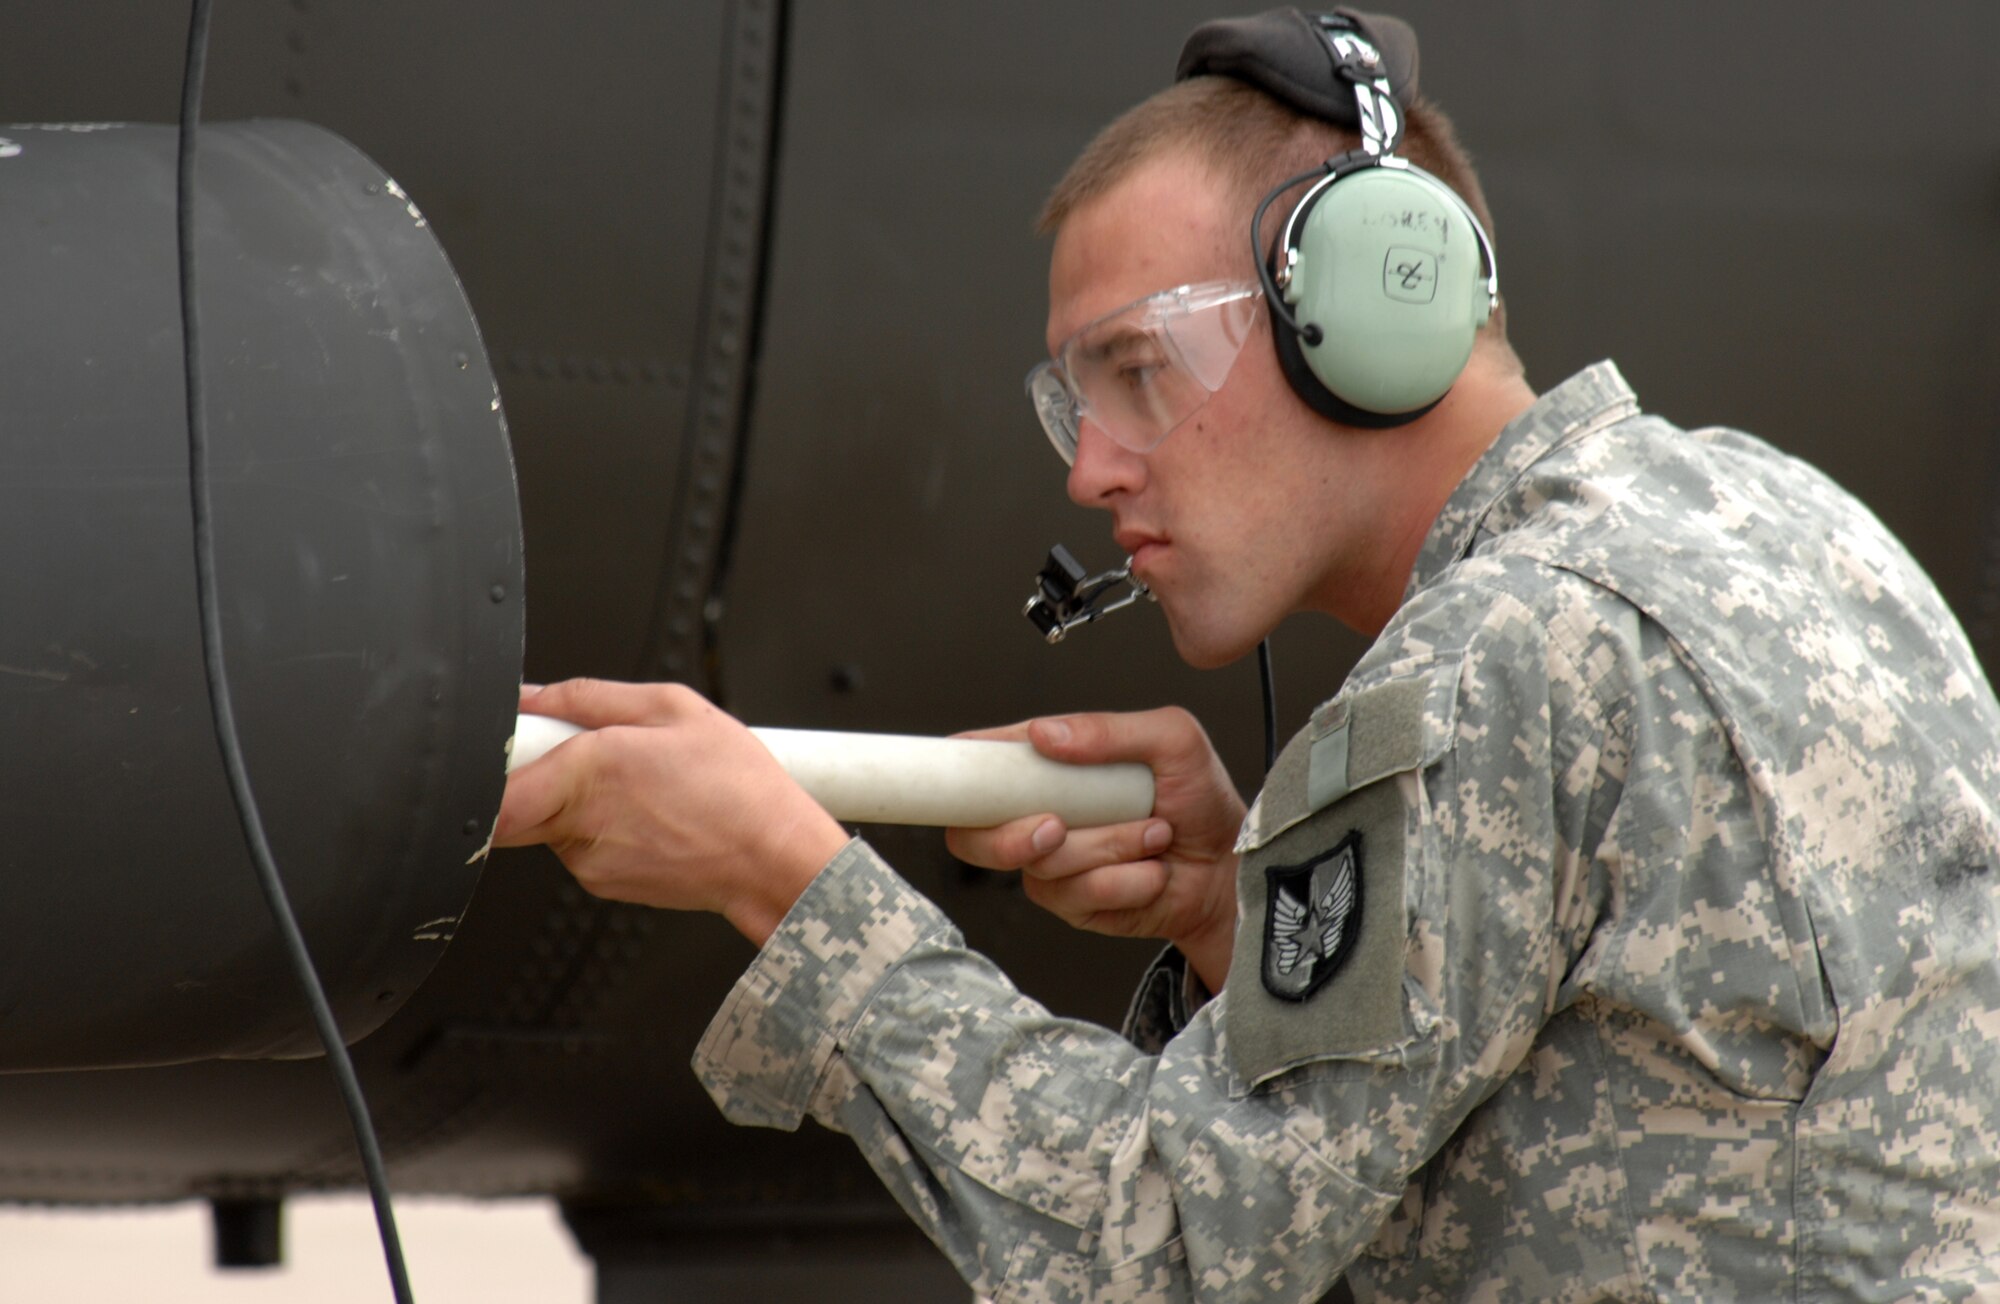 WHITEMAN AIR FORCE BASE, Mo. – Army Sgt. Christopher Lorey, 1-135th Attack Recon Battalion, seats 2.76 inch rockets on an AH-64A Apache Sept. 6. The Missouri Army National Guard’s 1-135th Attack Recon Battalion recently implemented a new training program that allows pilots to arm and fly three AH-64 Apache helicopters from Whiteman AFB to Fort Leonard Wood for the first time to practice aerial gunnery at their monthly drill. (U.S. Air Force photo/Senior Airman Stephen Linch)